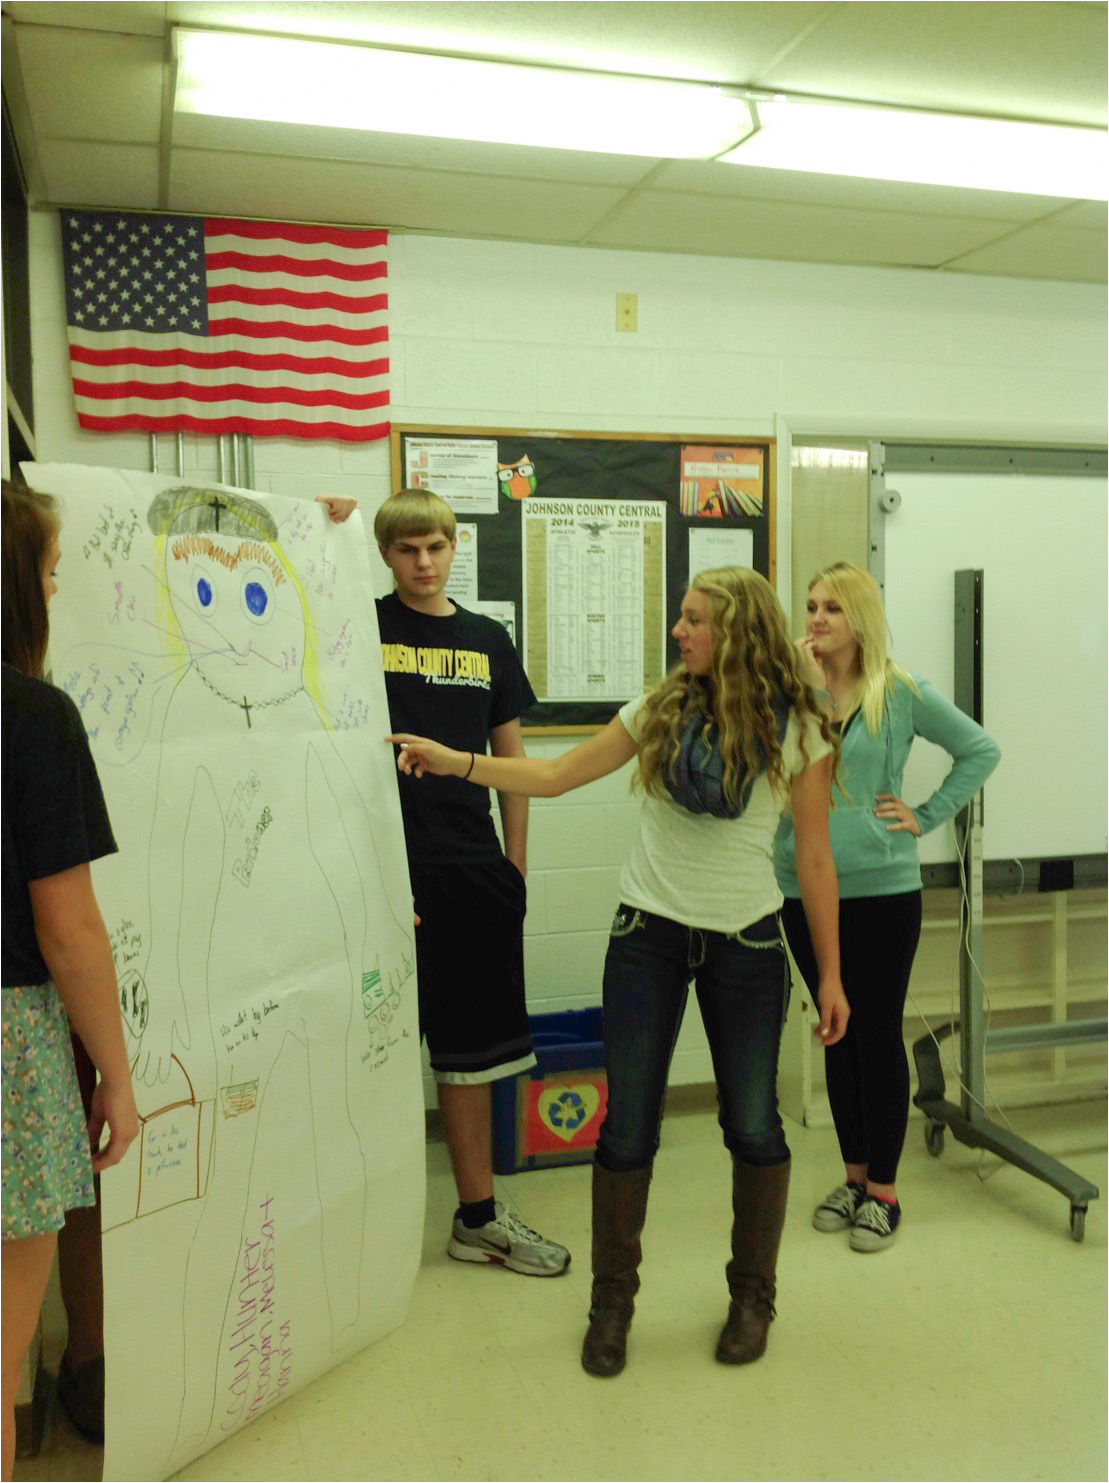 Senior, Melissa Bausch, explains key characteristics of the characterization poster created by members of her group.